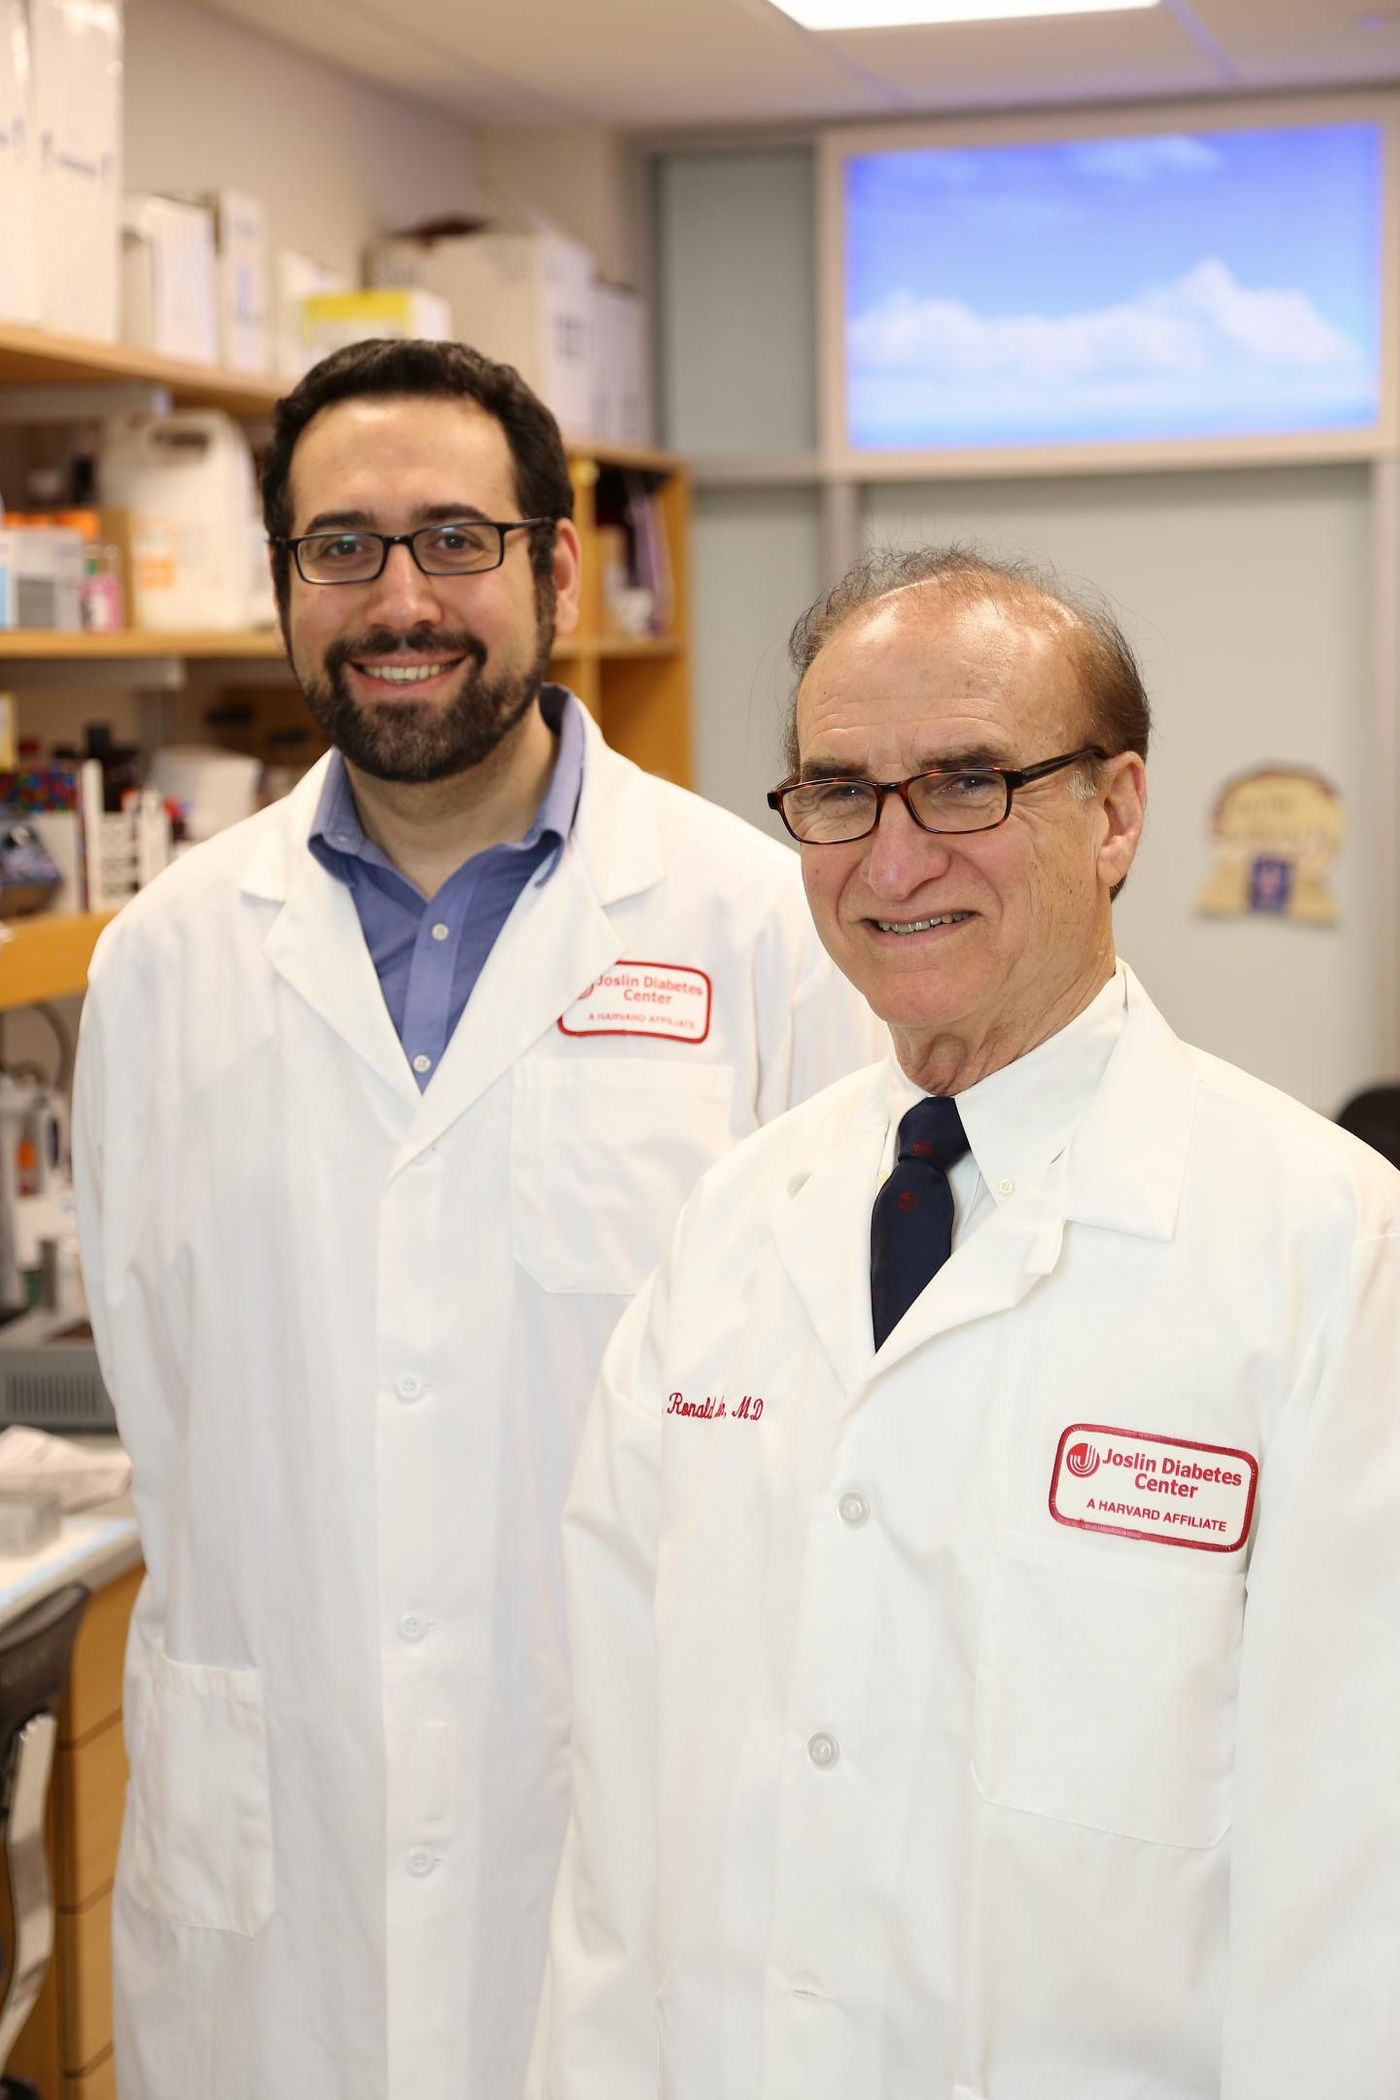 Emrah Altindis, PhD, research fellow in the section on Integrative Physiology And Metabolism at Joslin Diabetes Center, and C. Ronald Kahn, MD, Senior Investigator, Head of the Section on Integrative Physiology and Metabolism and Chief Academic Officer at Joslin Diabetes Center and the Mary K. Iacocca Professor of Medicine at Harvard Medical School  / Credit: Stephanie McPherson